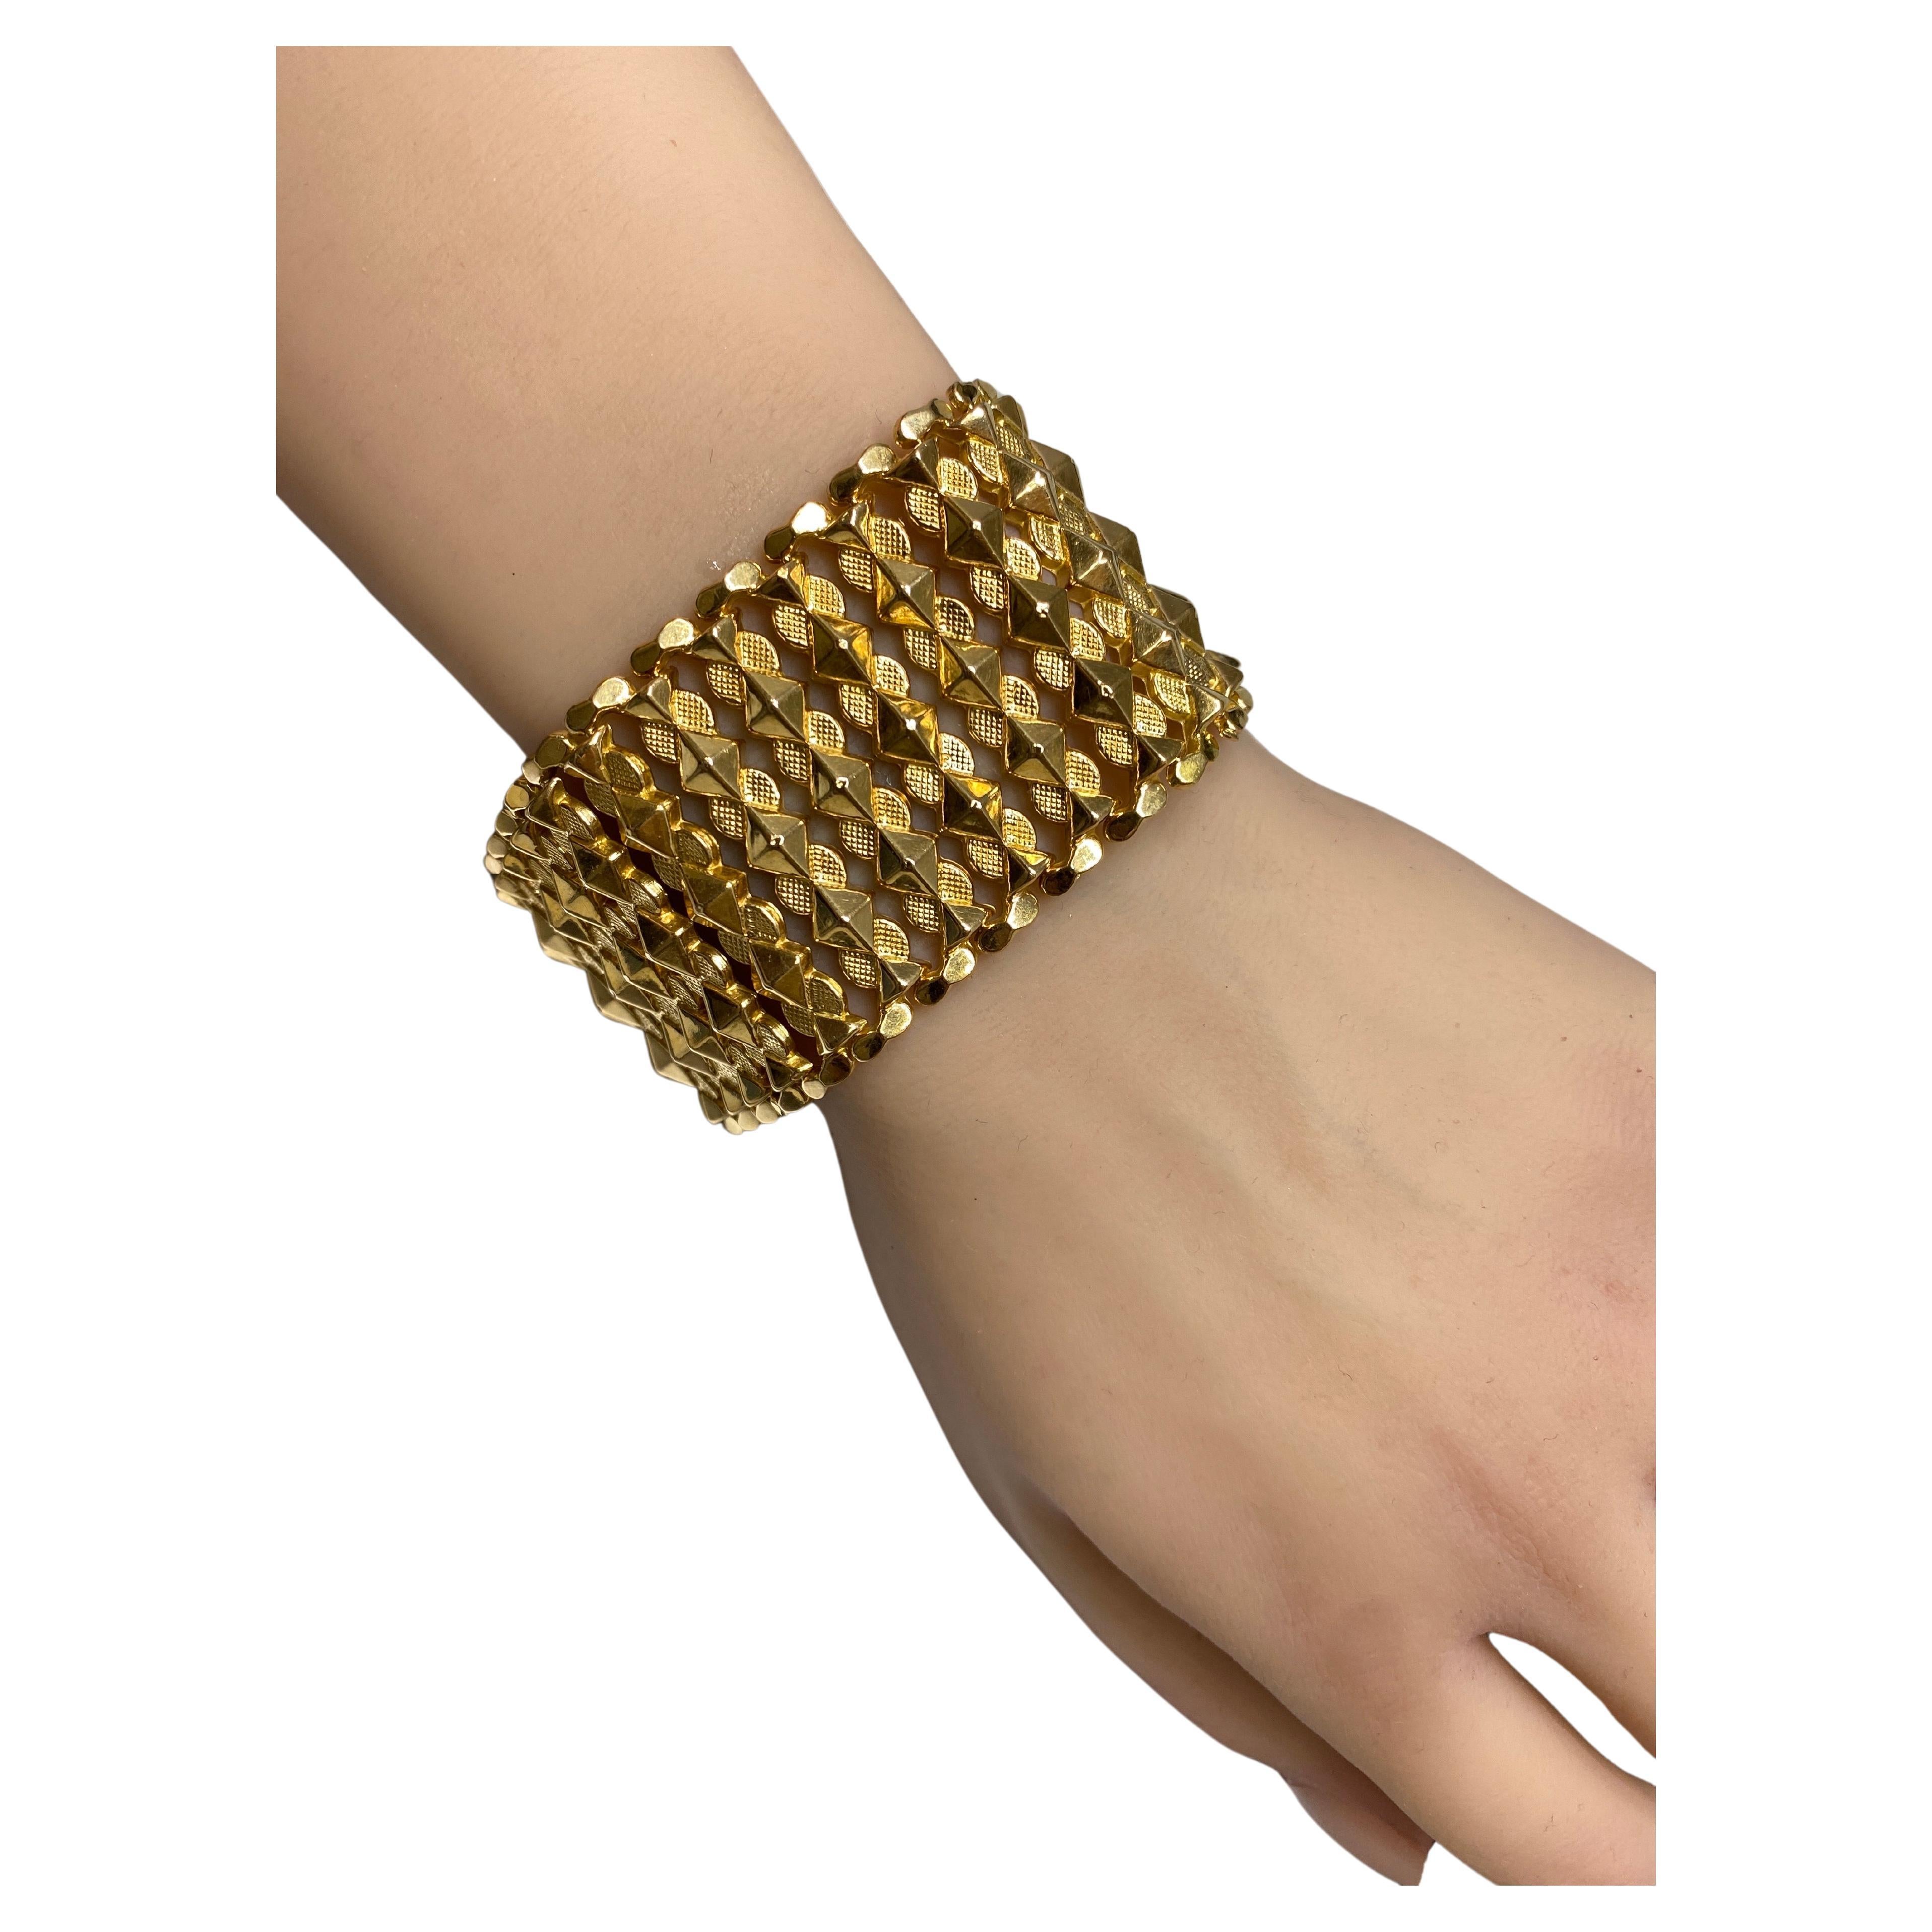 Up for your consideration is this fantastic 18kt rosey-yellow gold extra wide reticulated link bracelet made in Italy circa 1960's.

This big, bold, and beautiful wrist bauble, is 1 1/2